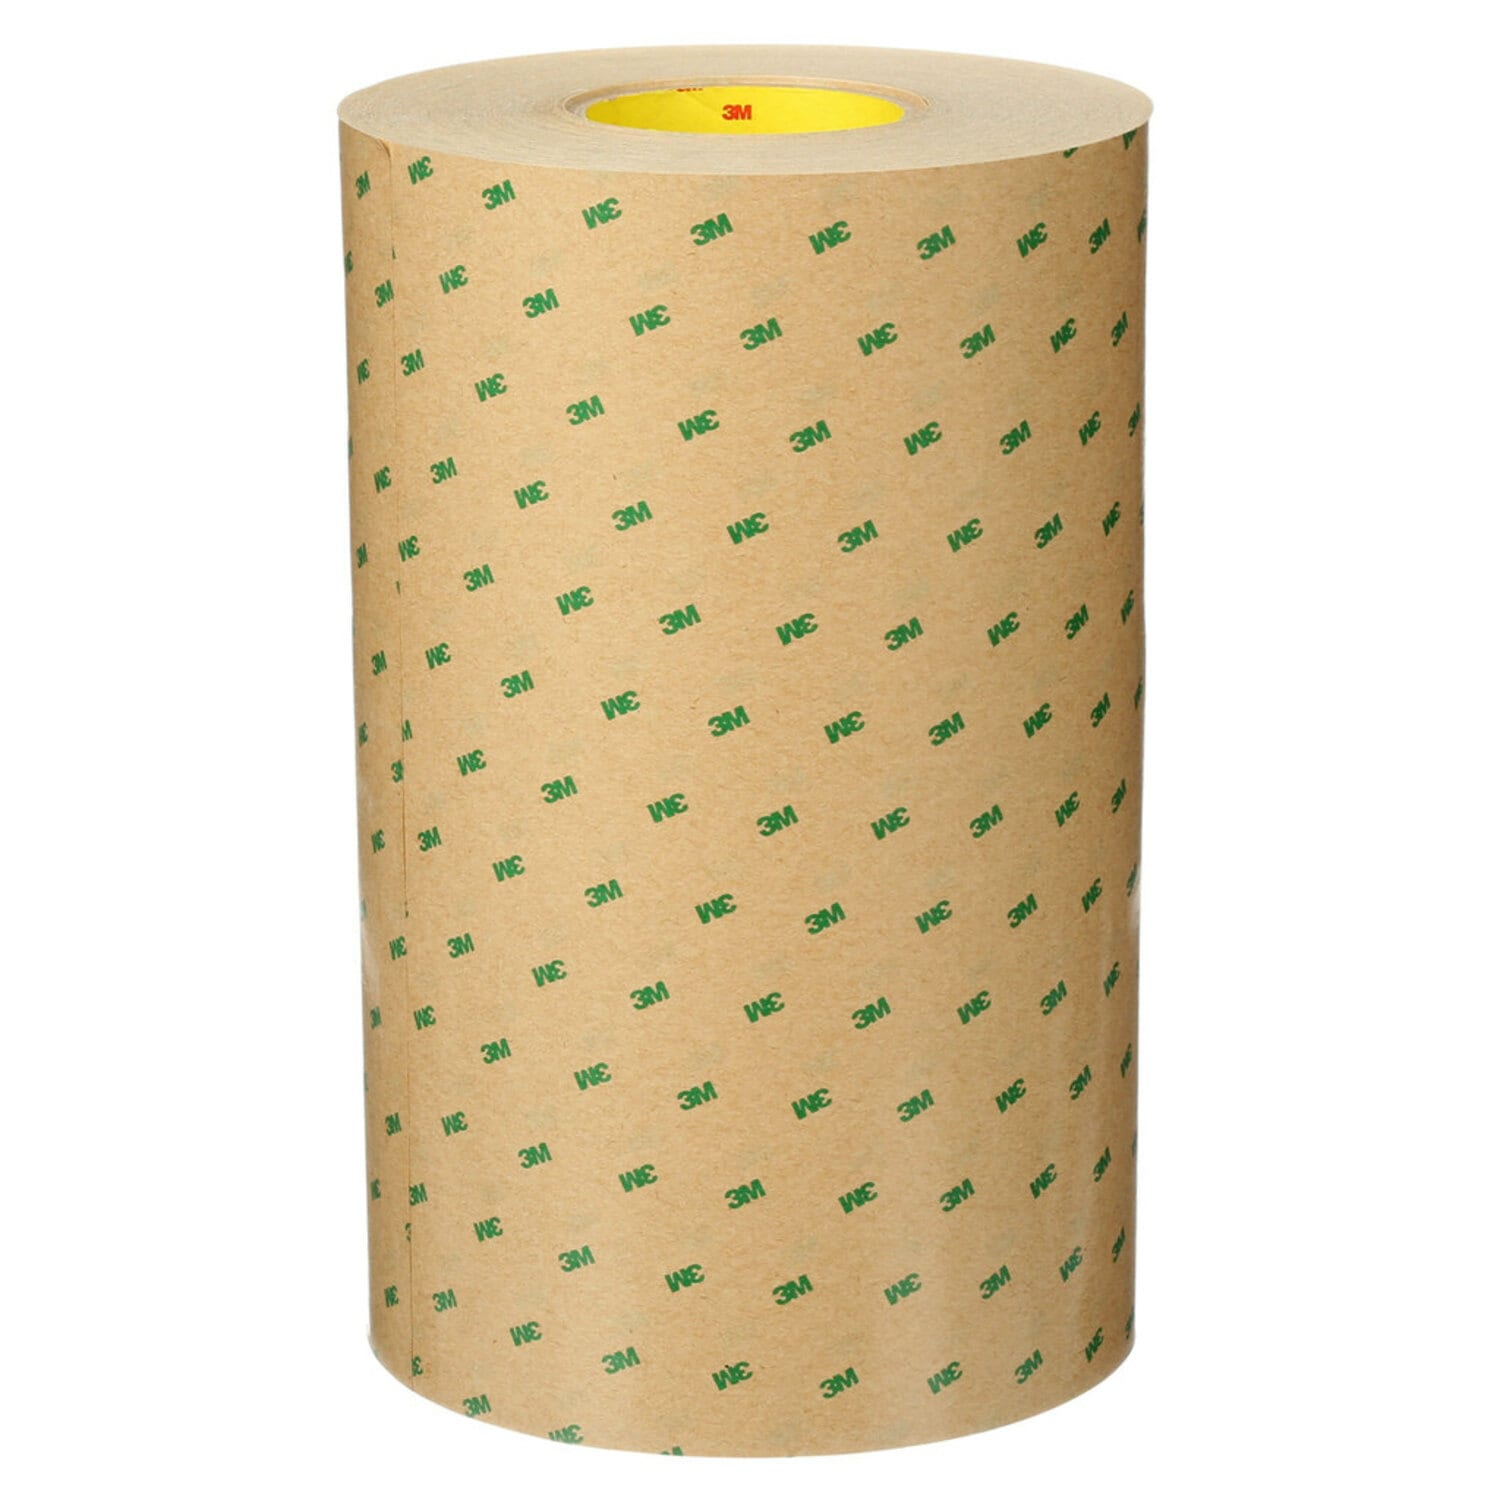 7000123562 - 3M Adhesive Transfer Tape 9472, Clear, 1 in x 60 yd, 5 mil, 36 rolls
per case